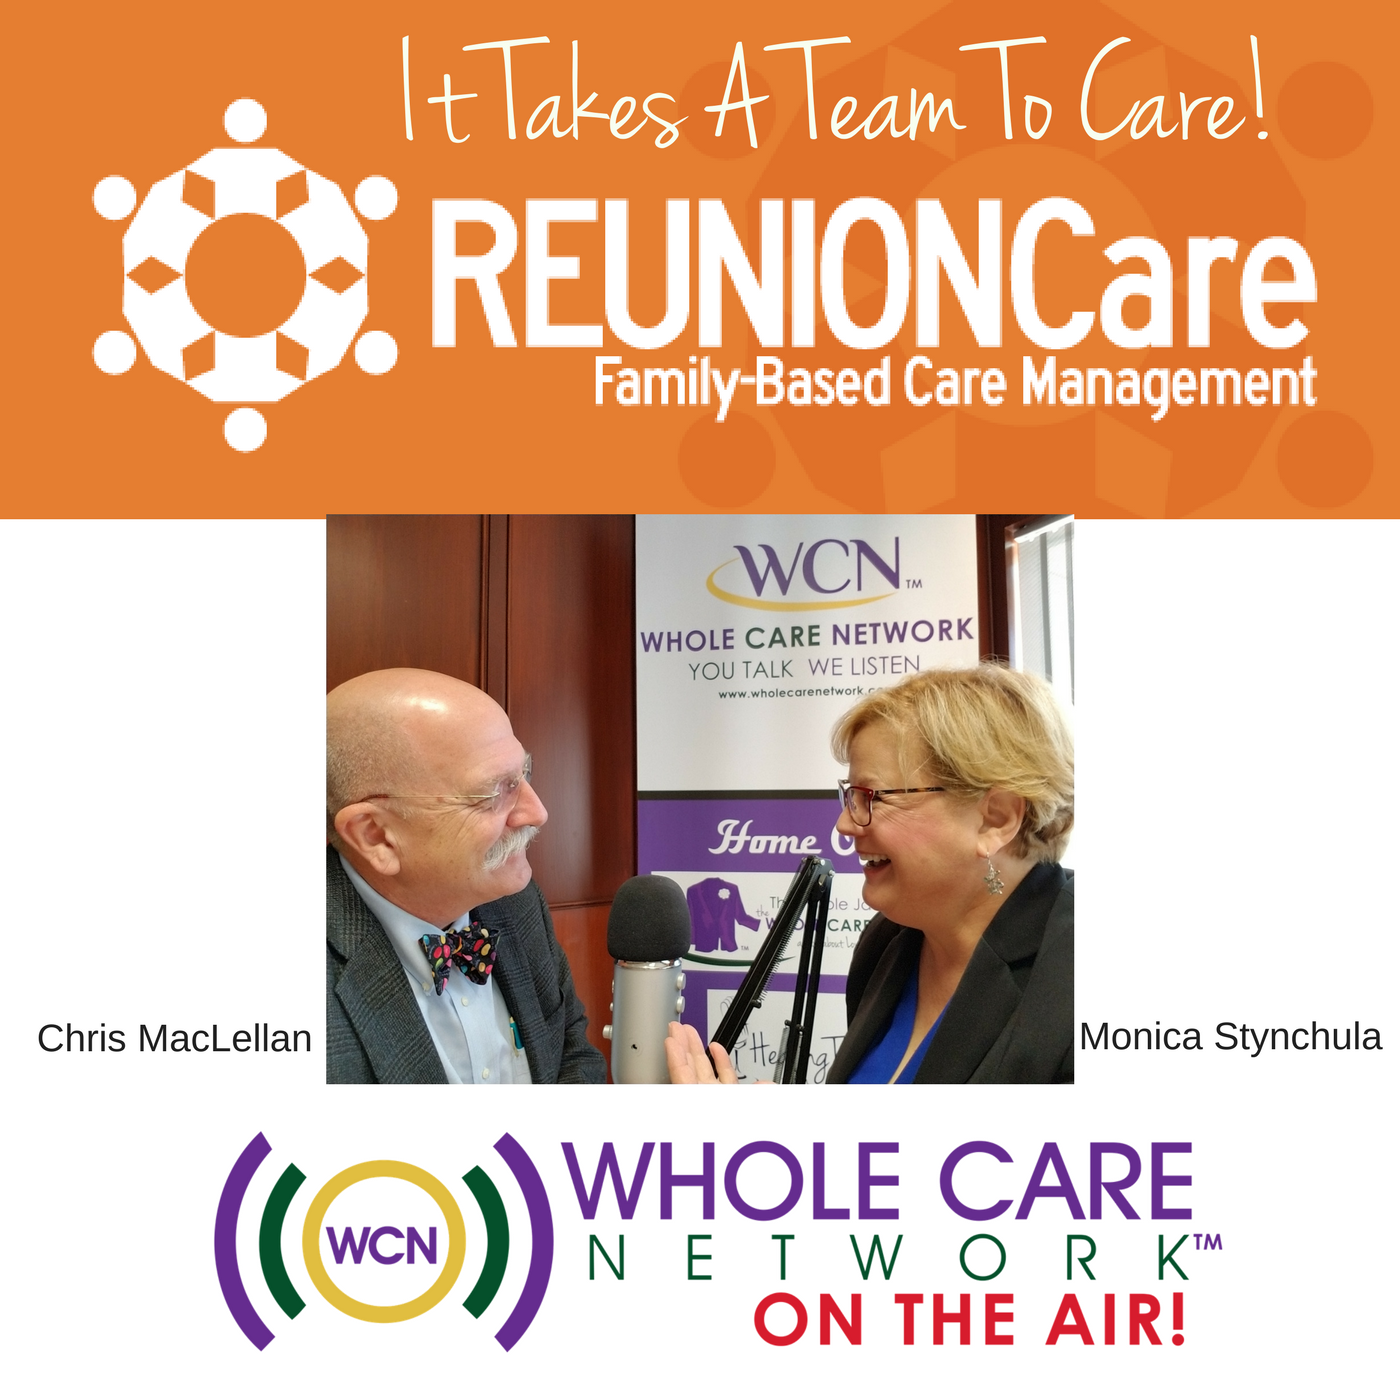 https://thewholecarenetwork.com/wp-content/uploads/2018/04/WCN-Reunion-Care-Podcast-Cover.png